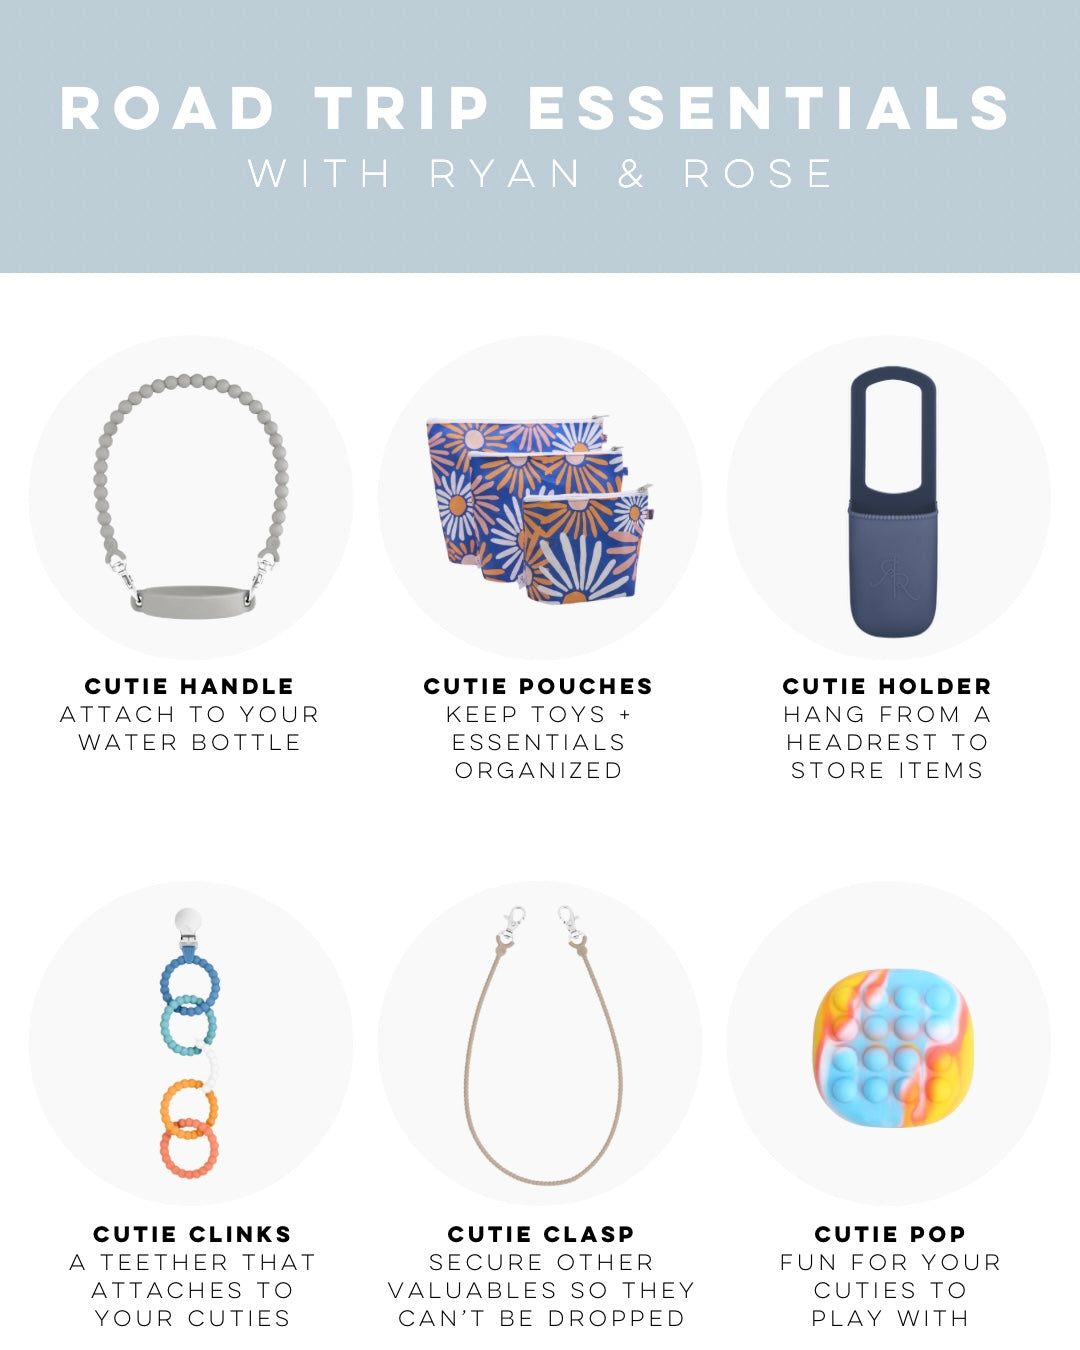 Road Trip Essentials with Ryan & Rose | Cutie Handle, Cutie Pouch, Holder, Clinks, Cutie Pop, Clasps and pop-it